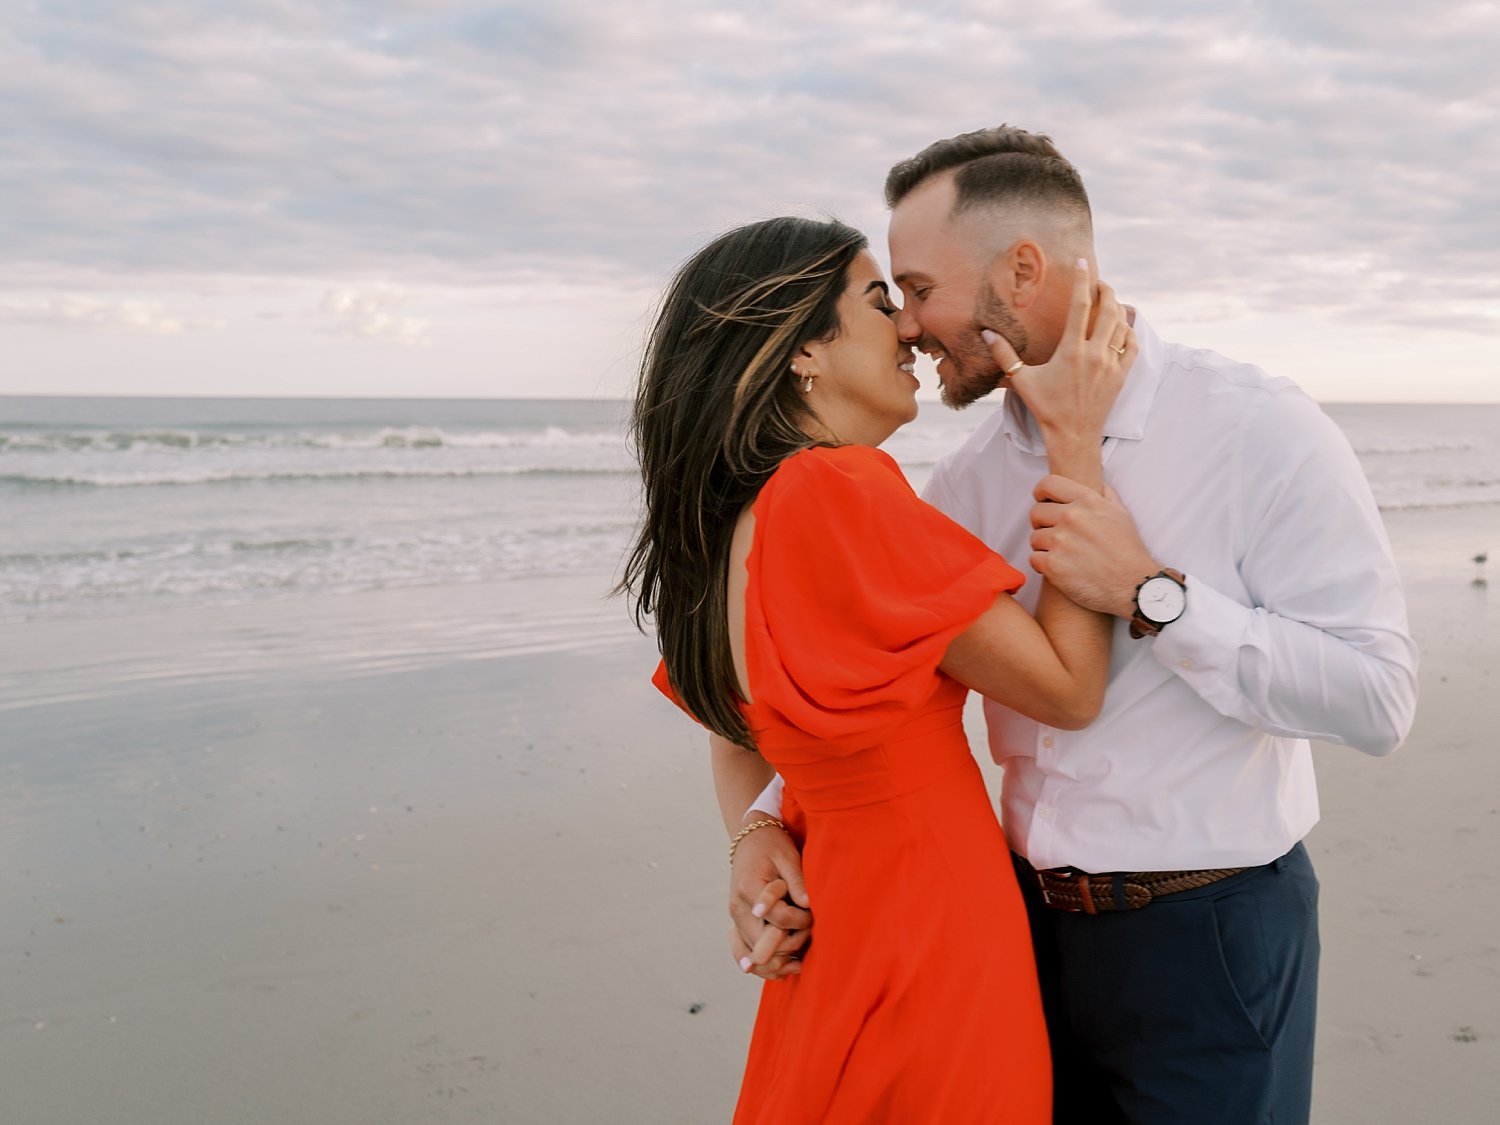 man in white shirt leans to kiss woman in orange dress during Ocean City NJ engagement session on beach